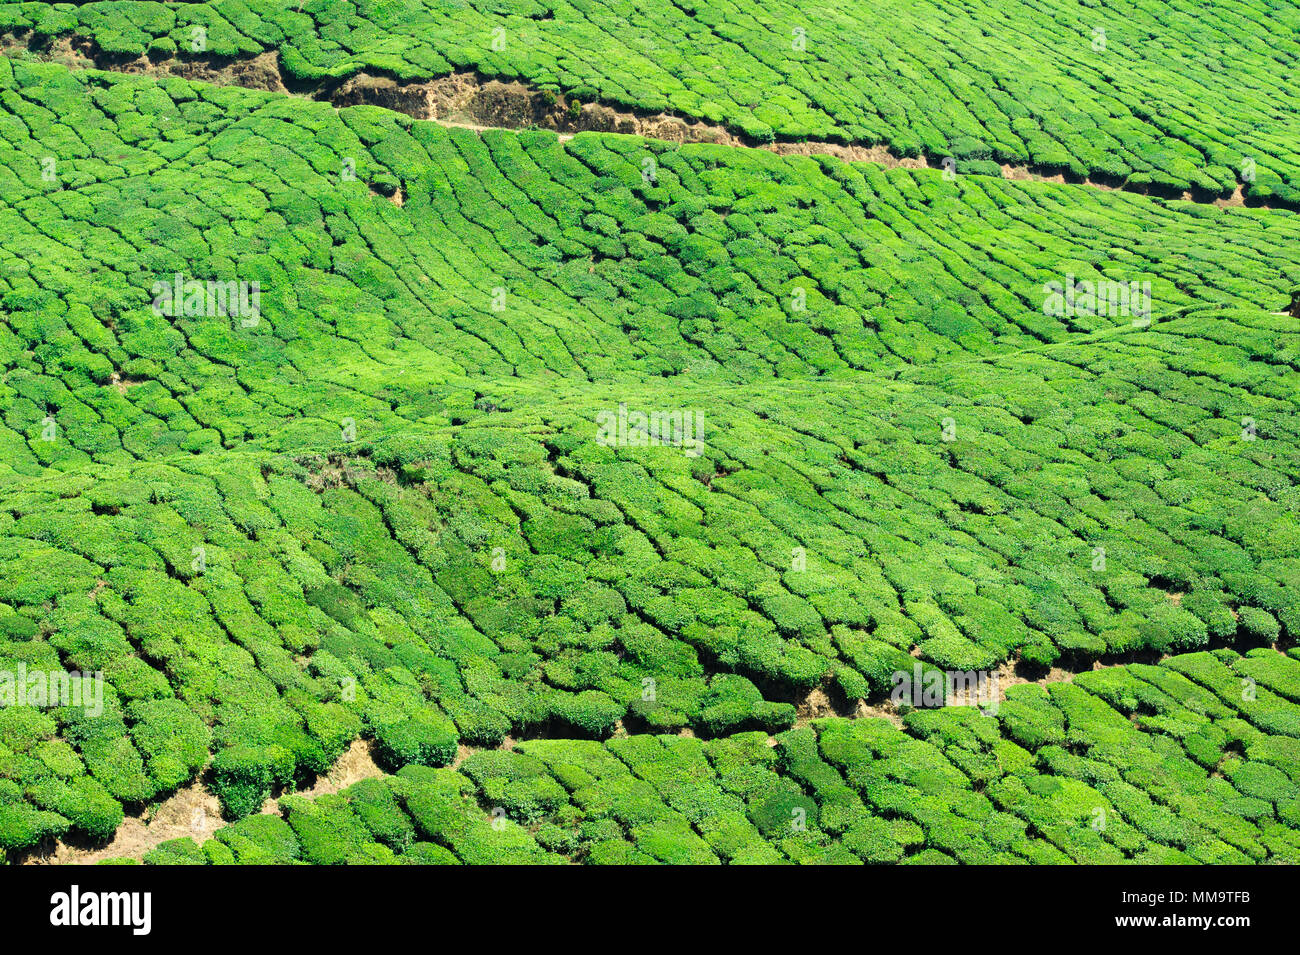 Beautiful expanse of green tea plantations grown in terraces on the hills of Darjeeling, India. Stock Photo